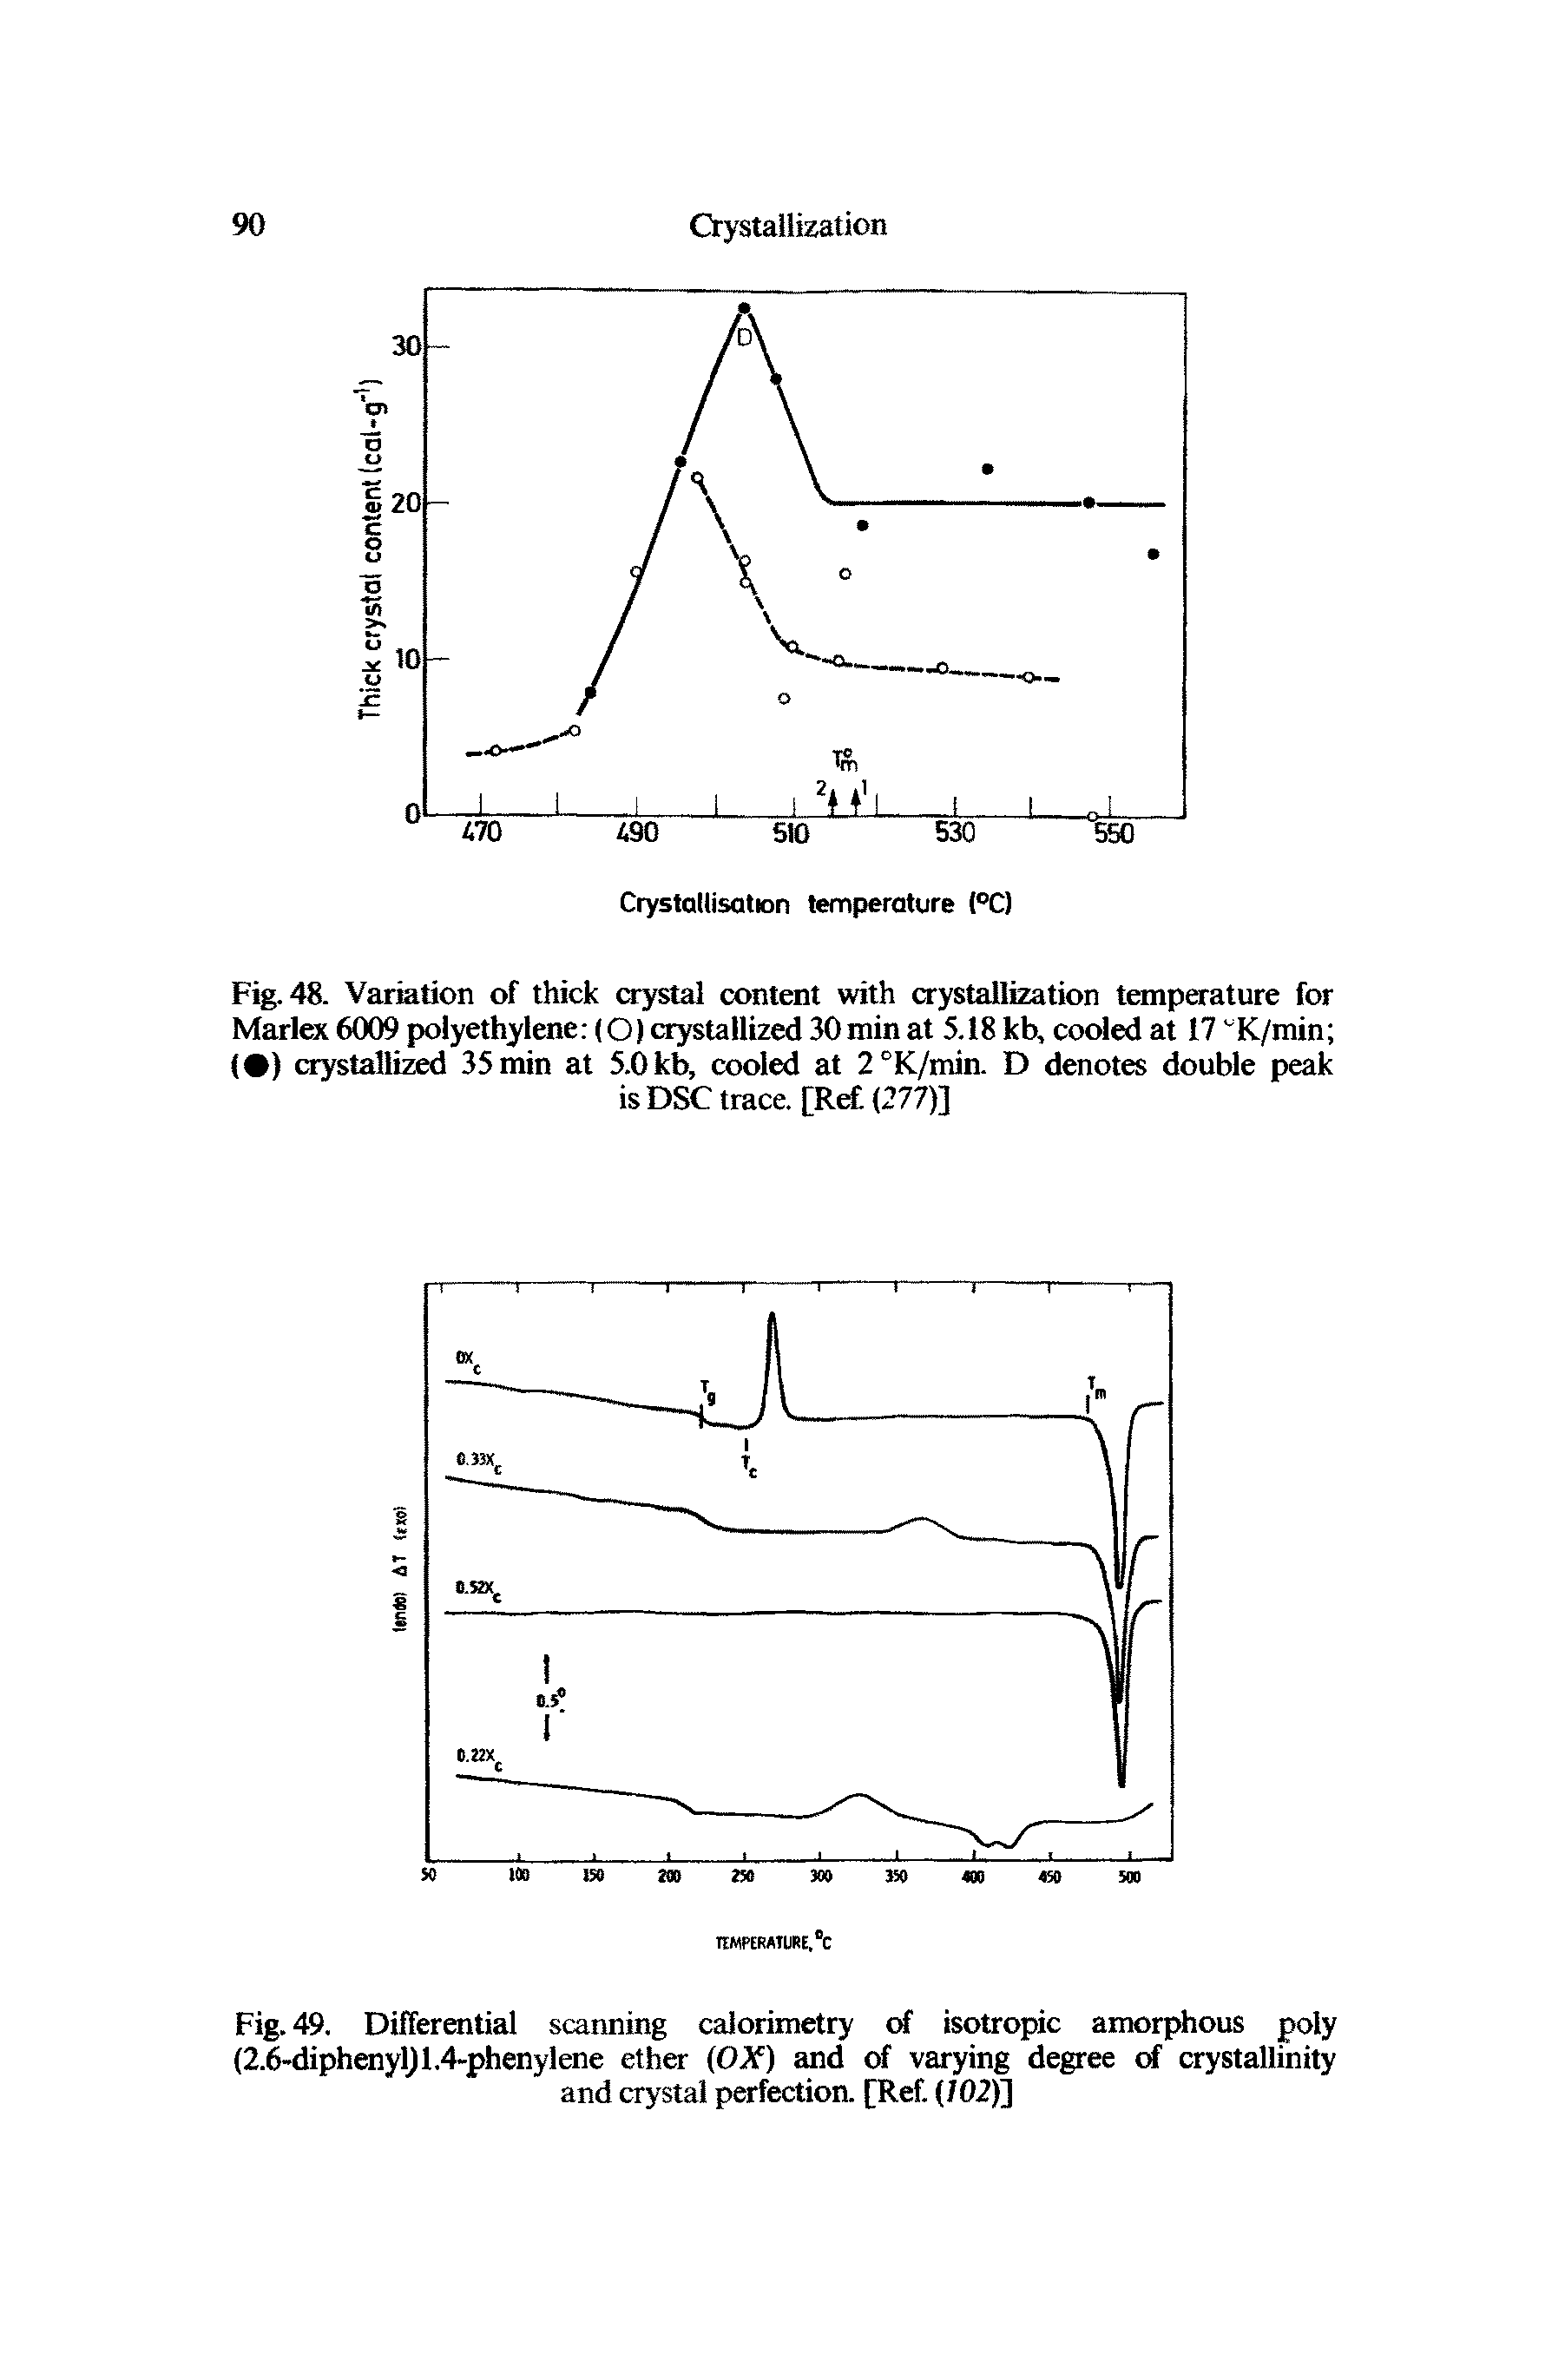 Fig. 48. Variation of thick OTStal content with crystallization temperature for Marlex 6009 polyethylene (O) crystallized 30 min at 5.18 kb, cooled at 17 K/min ( ) crystalli 35 min at 5.0 kb, cooled at 2°K/min. D denotes double peak is DSC trace. [Ref (277)]...